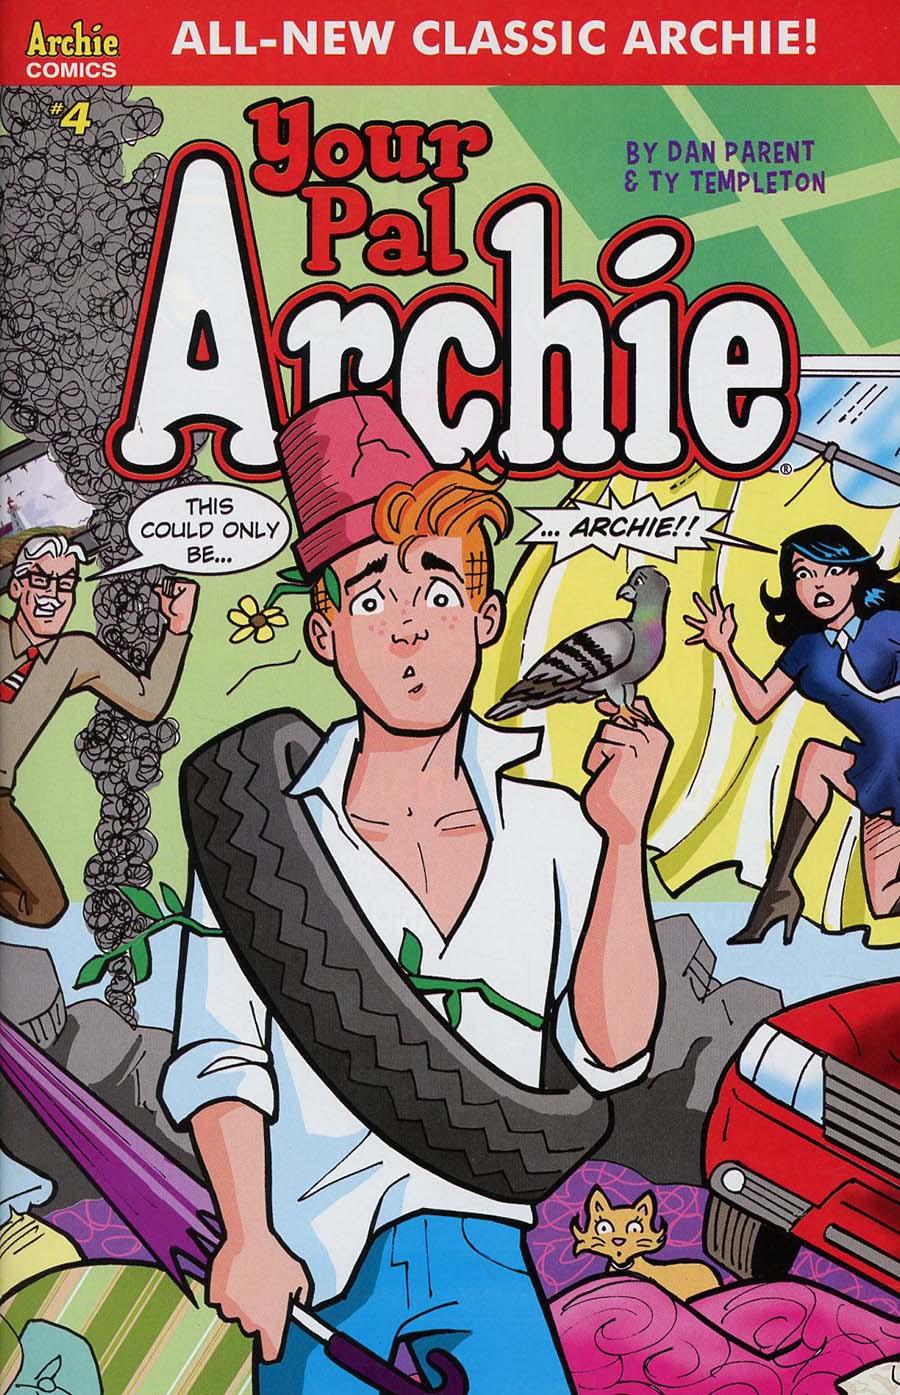 All-New Classic Archie Your Pal Archie Vol. 1 #4